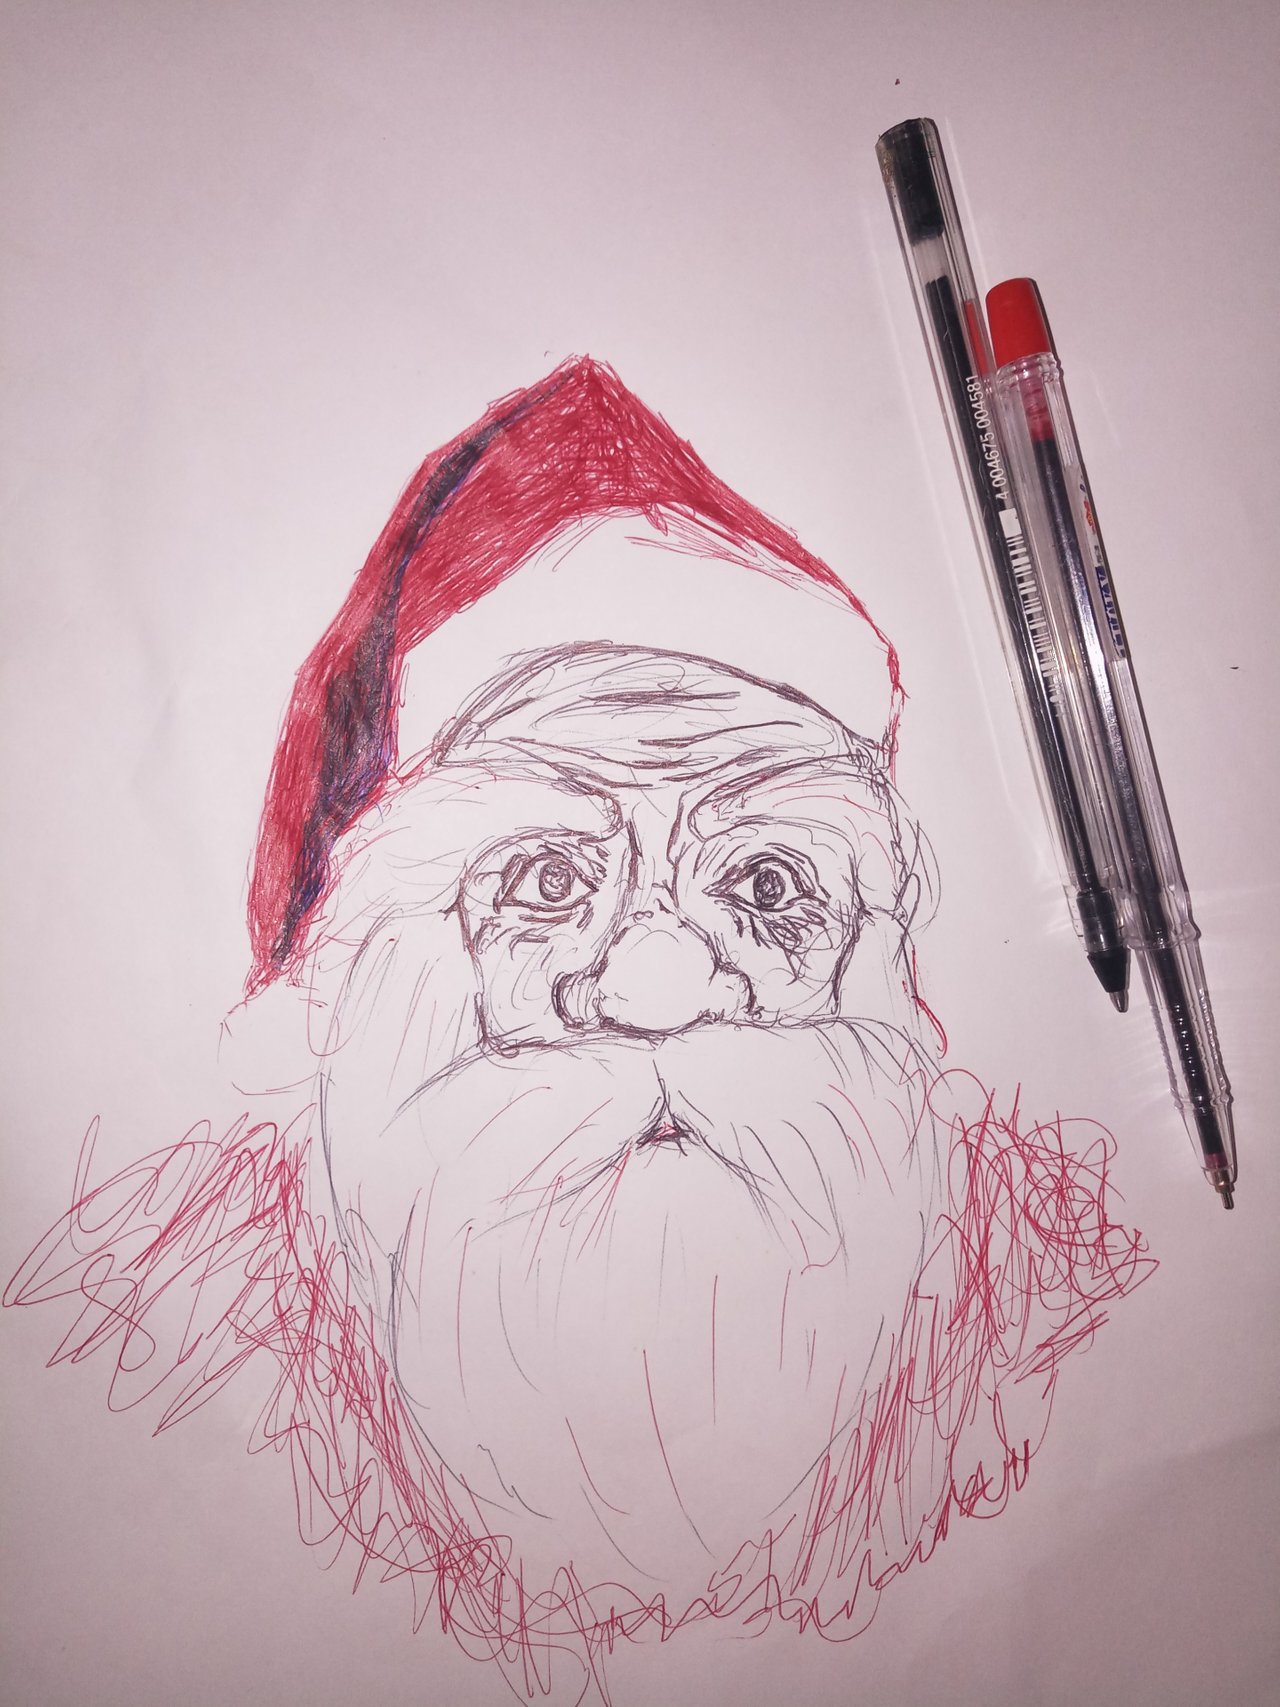 Easy How to Draw Santa Claus Tutorial Video and Coloring Page-saigonsouth.com.vn